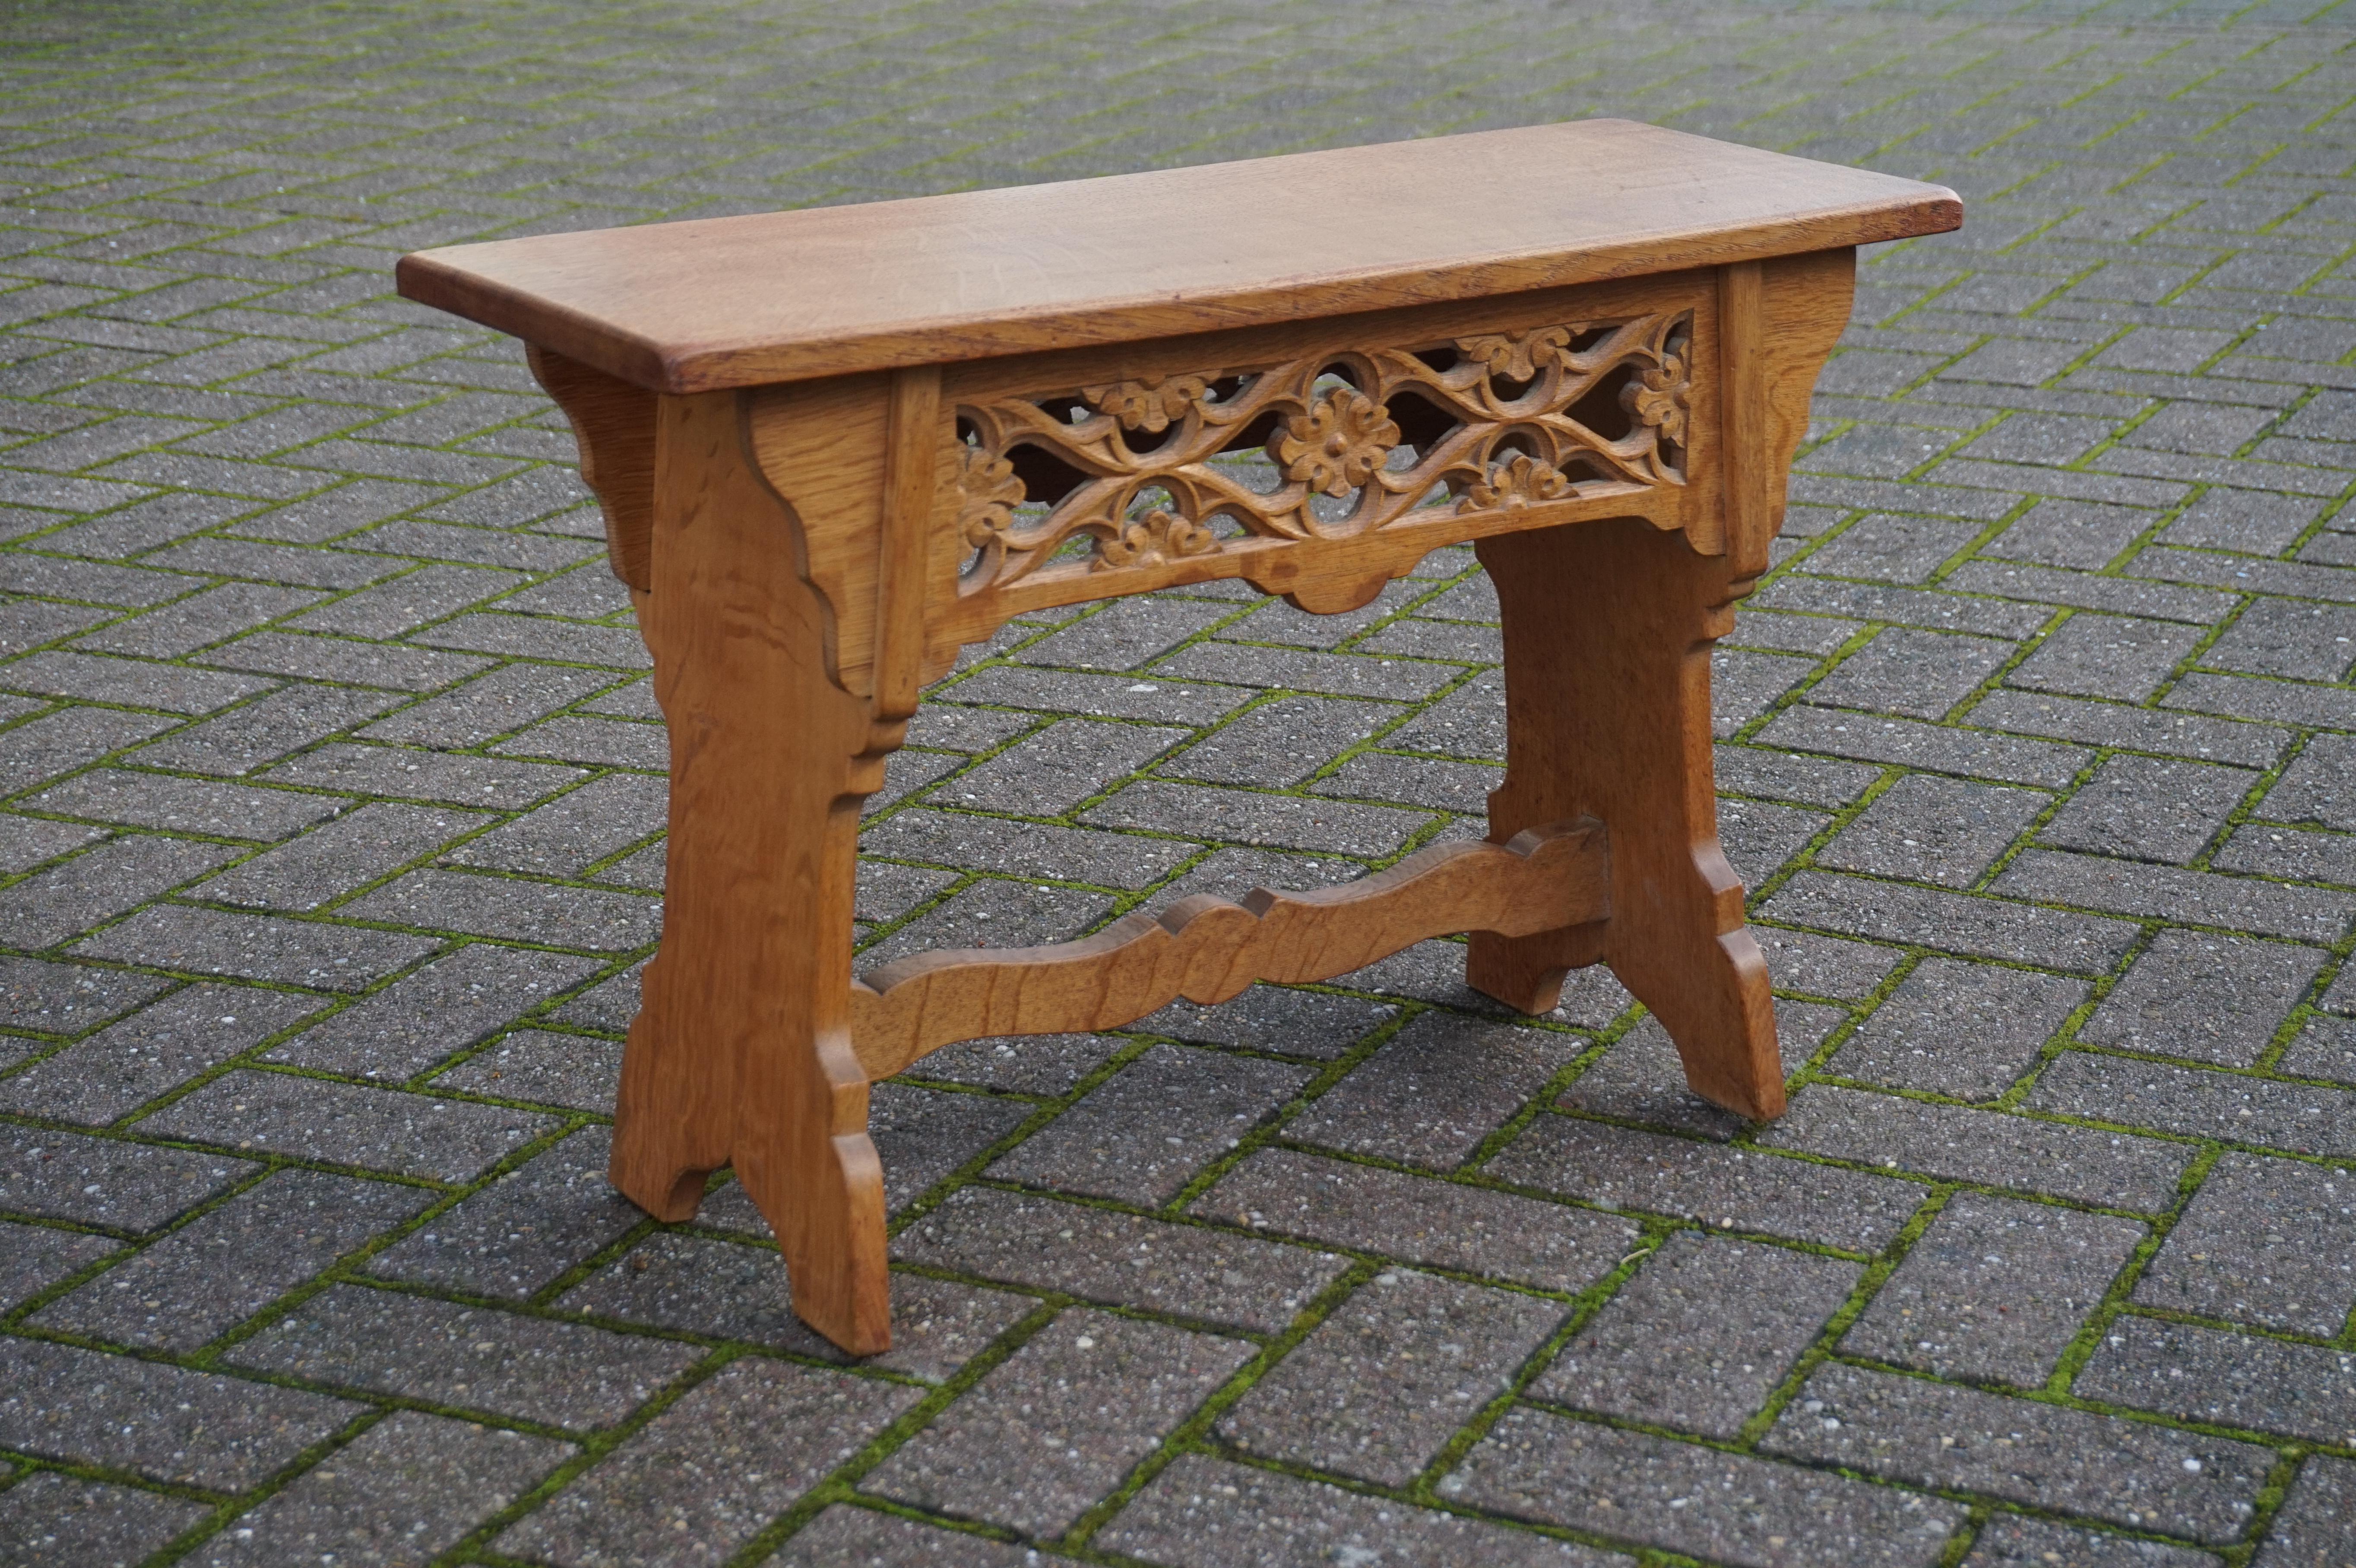 Beautifully designed and highly practical Gothic style bench.

This unique, Gothic Revival bench is another one of our recent great finds. It has so much going for it that we immediately fell in love with it. All handcrafted out of solid tiger oak,